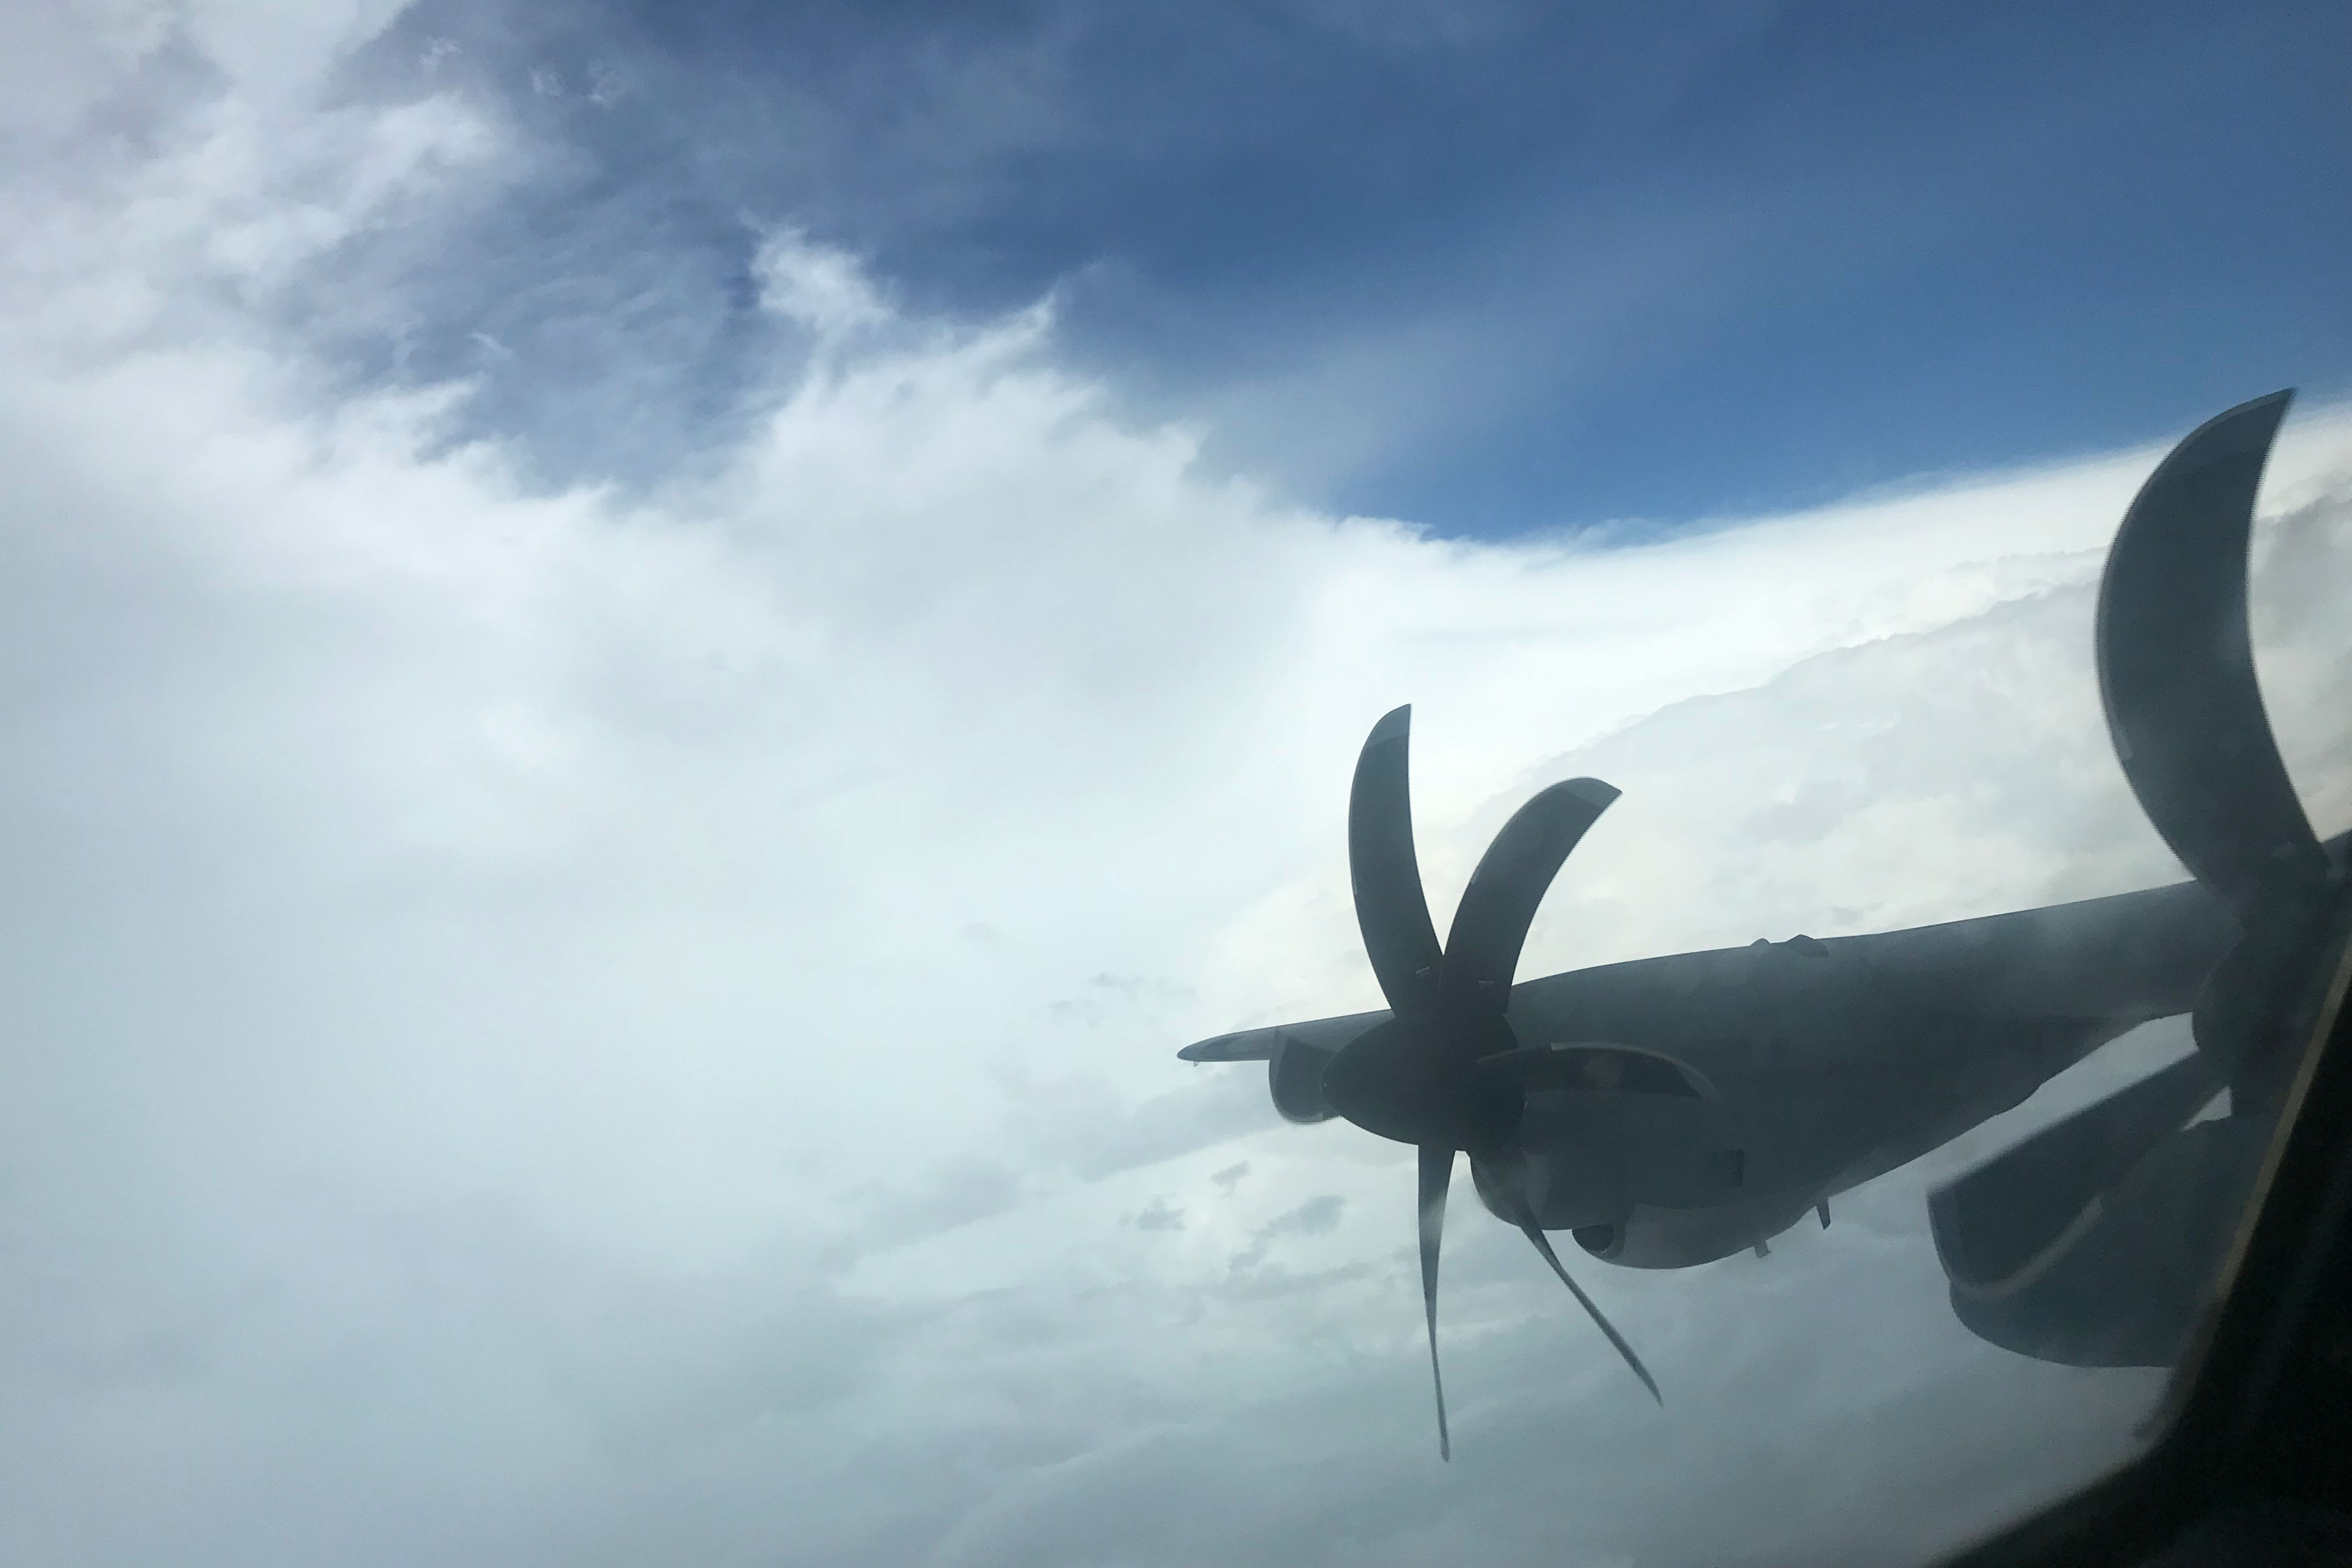 What it's like to fly through the eye of Hurricane Dorian, in the name of safety